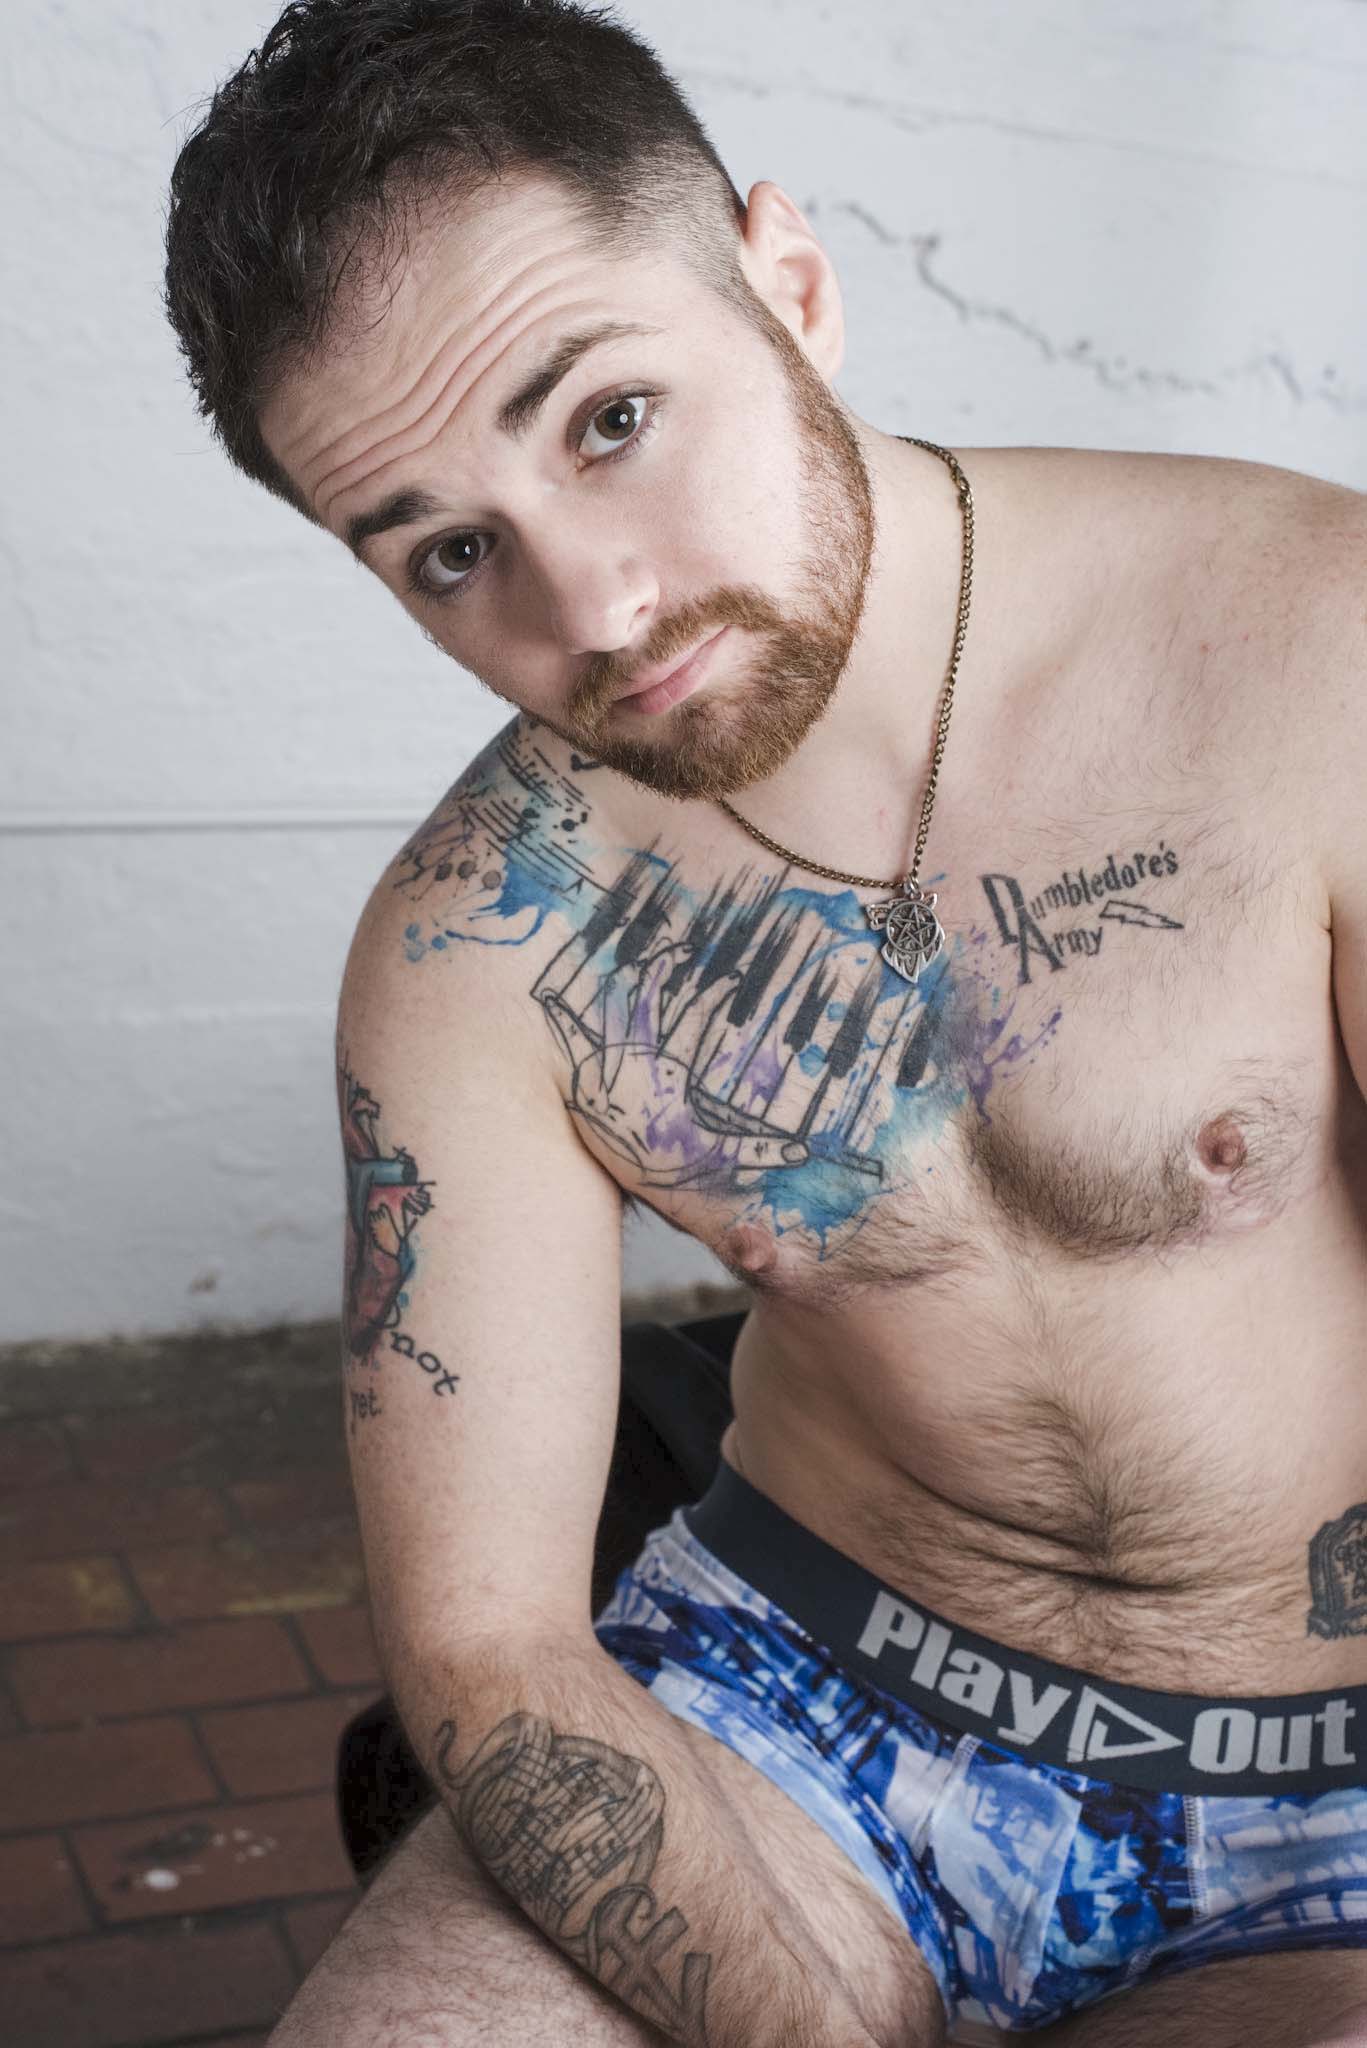 Tony D, musician and composer, caucasian trans man, poses in Play Out gender equal trunks underwear.